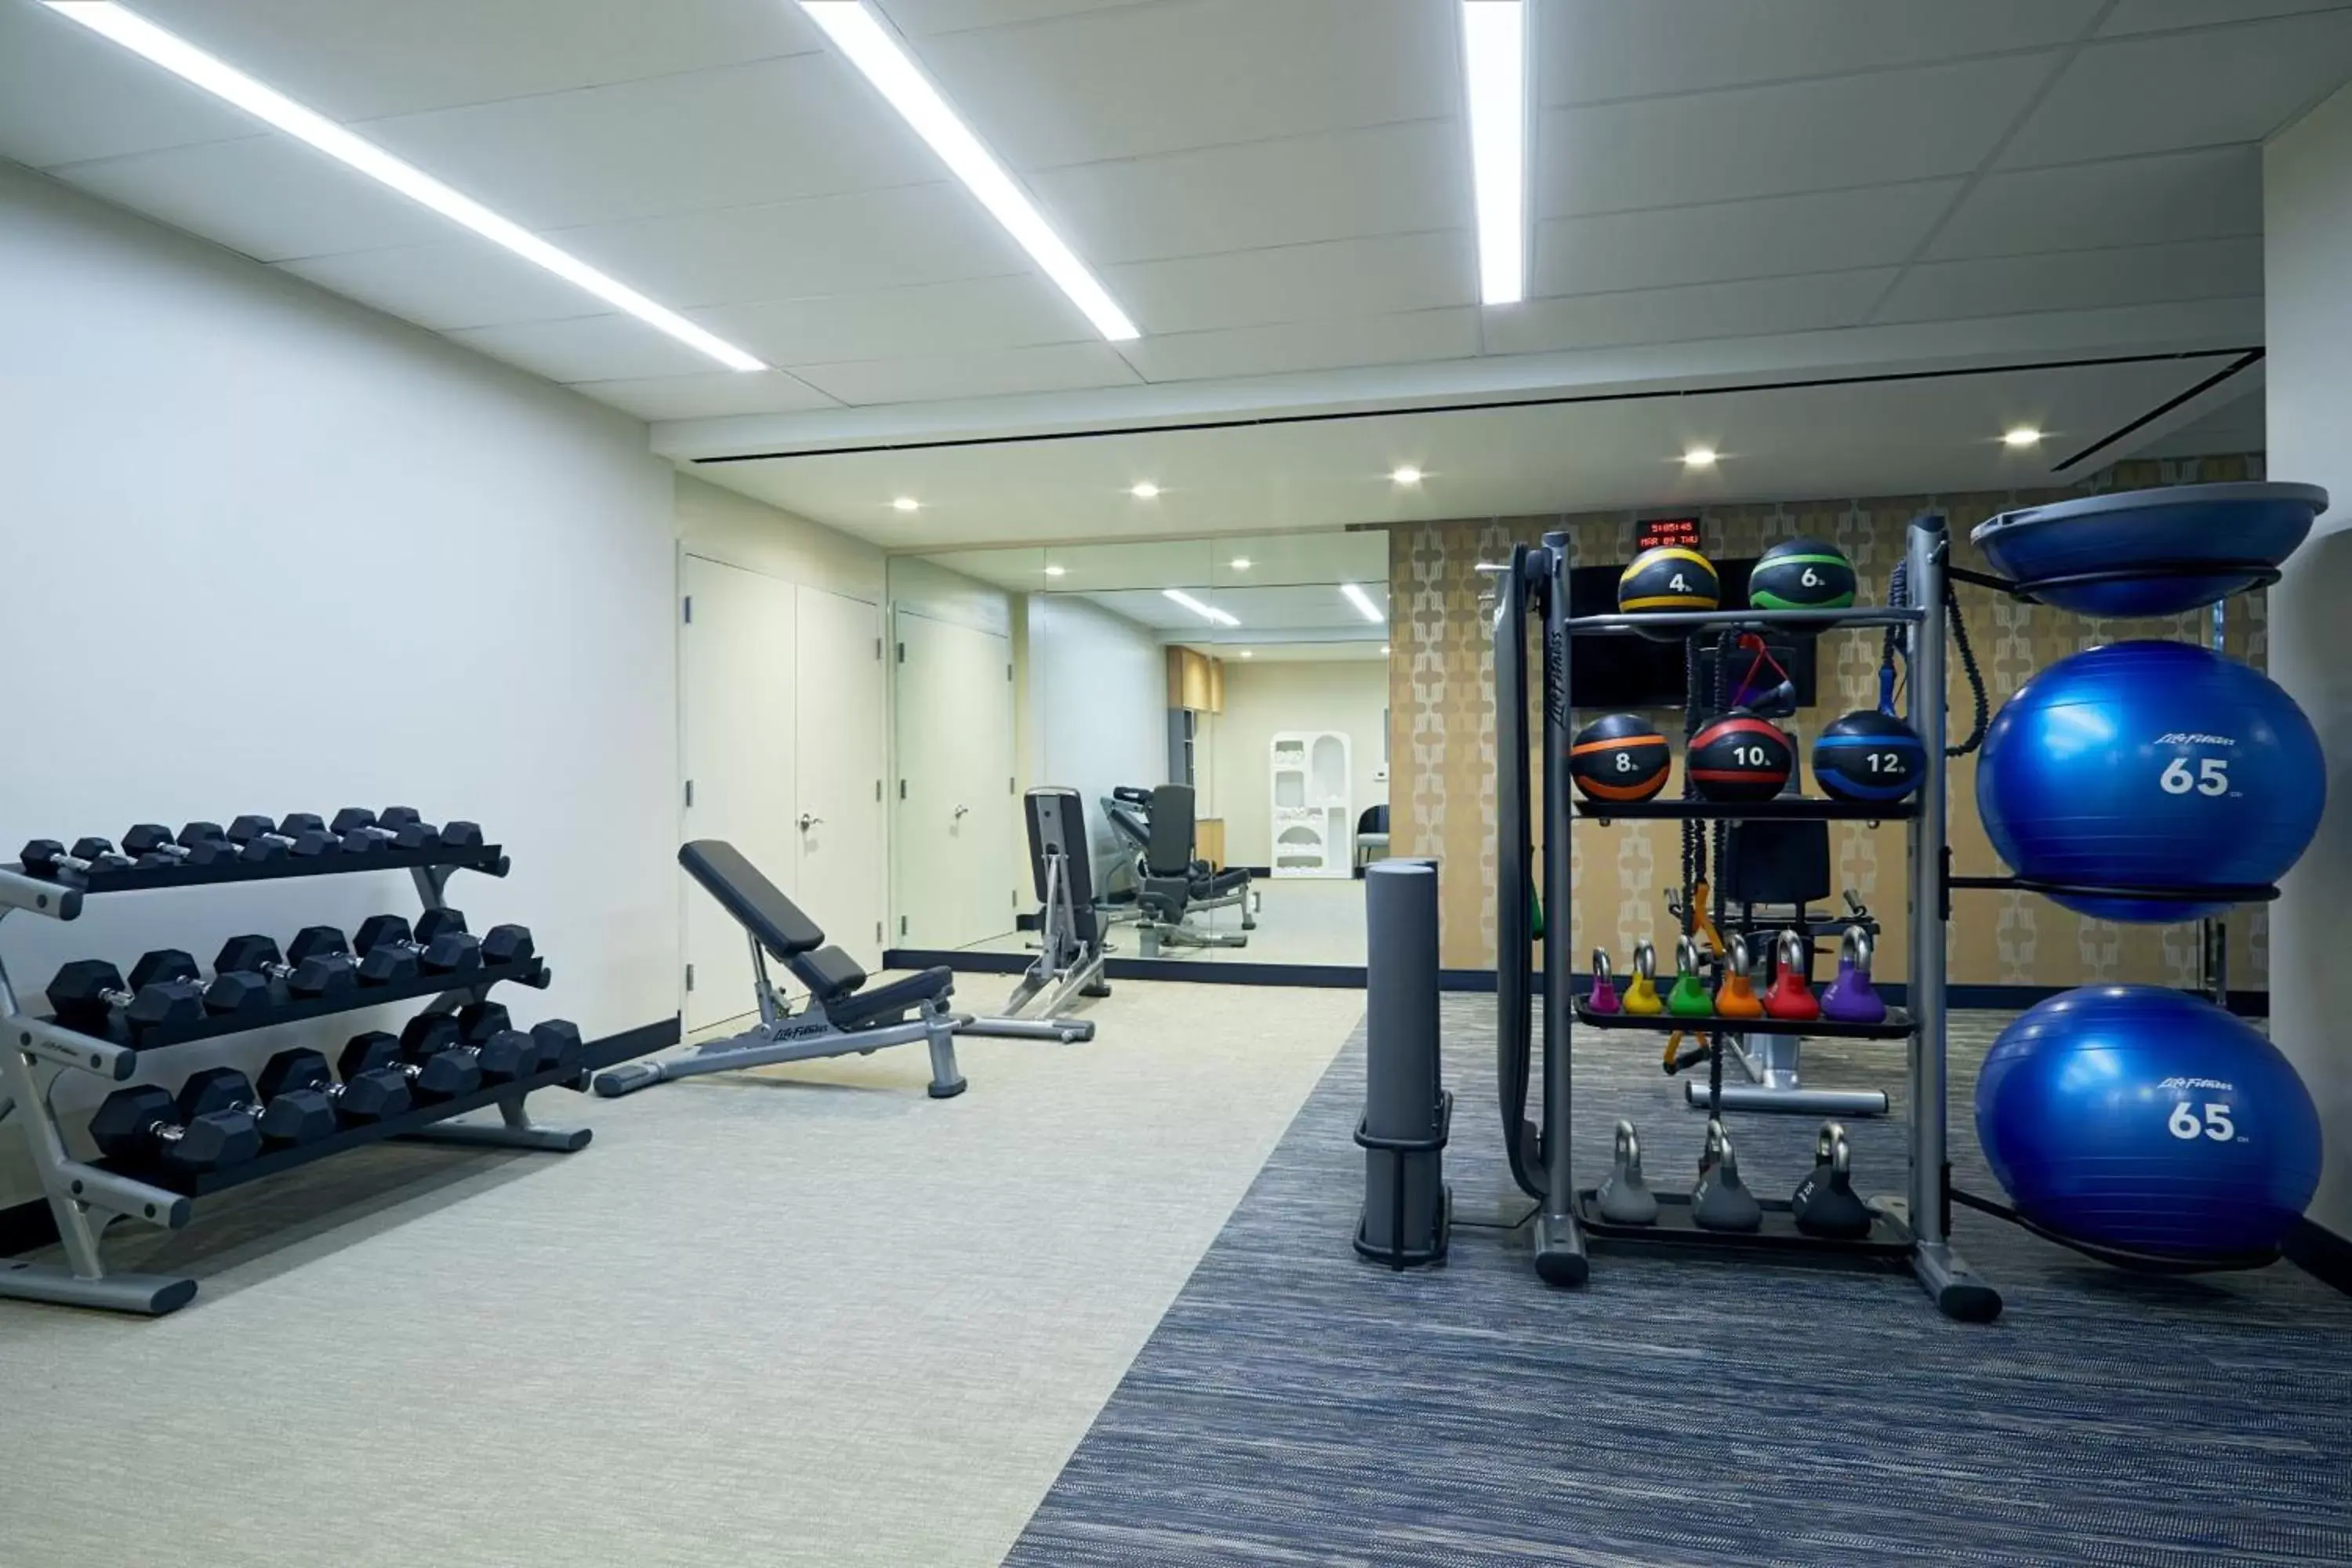 Fitness centre/facilities, Fitness Center/Facilities in Courtyard by Marriott Santa Barbara Downtown